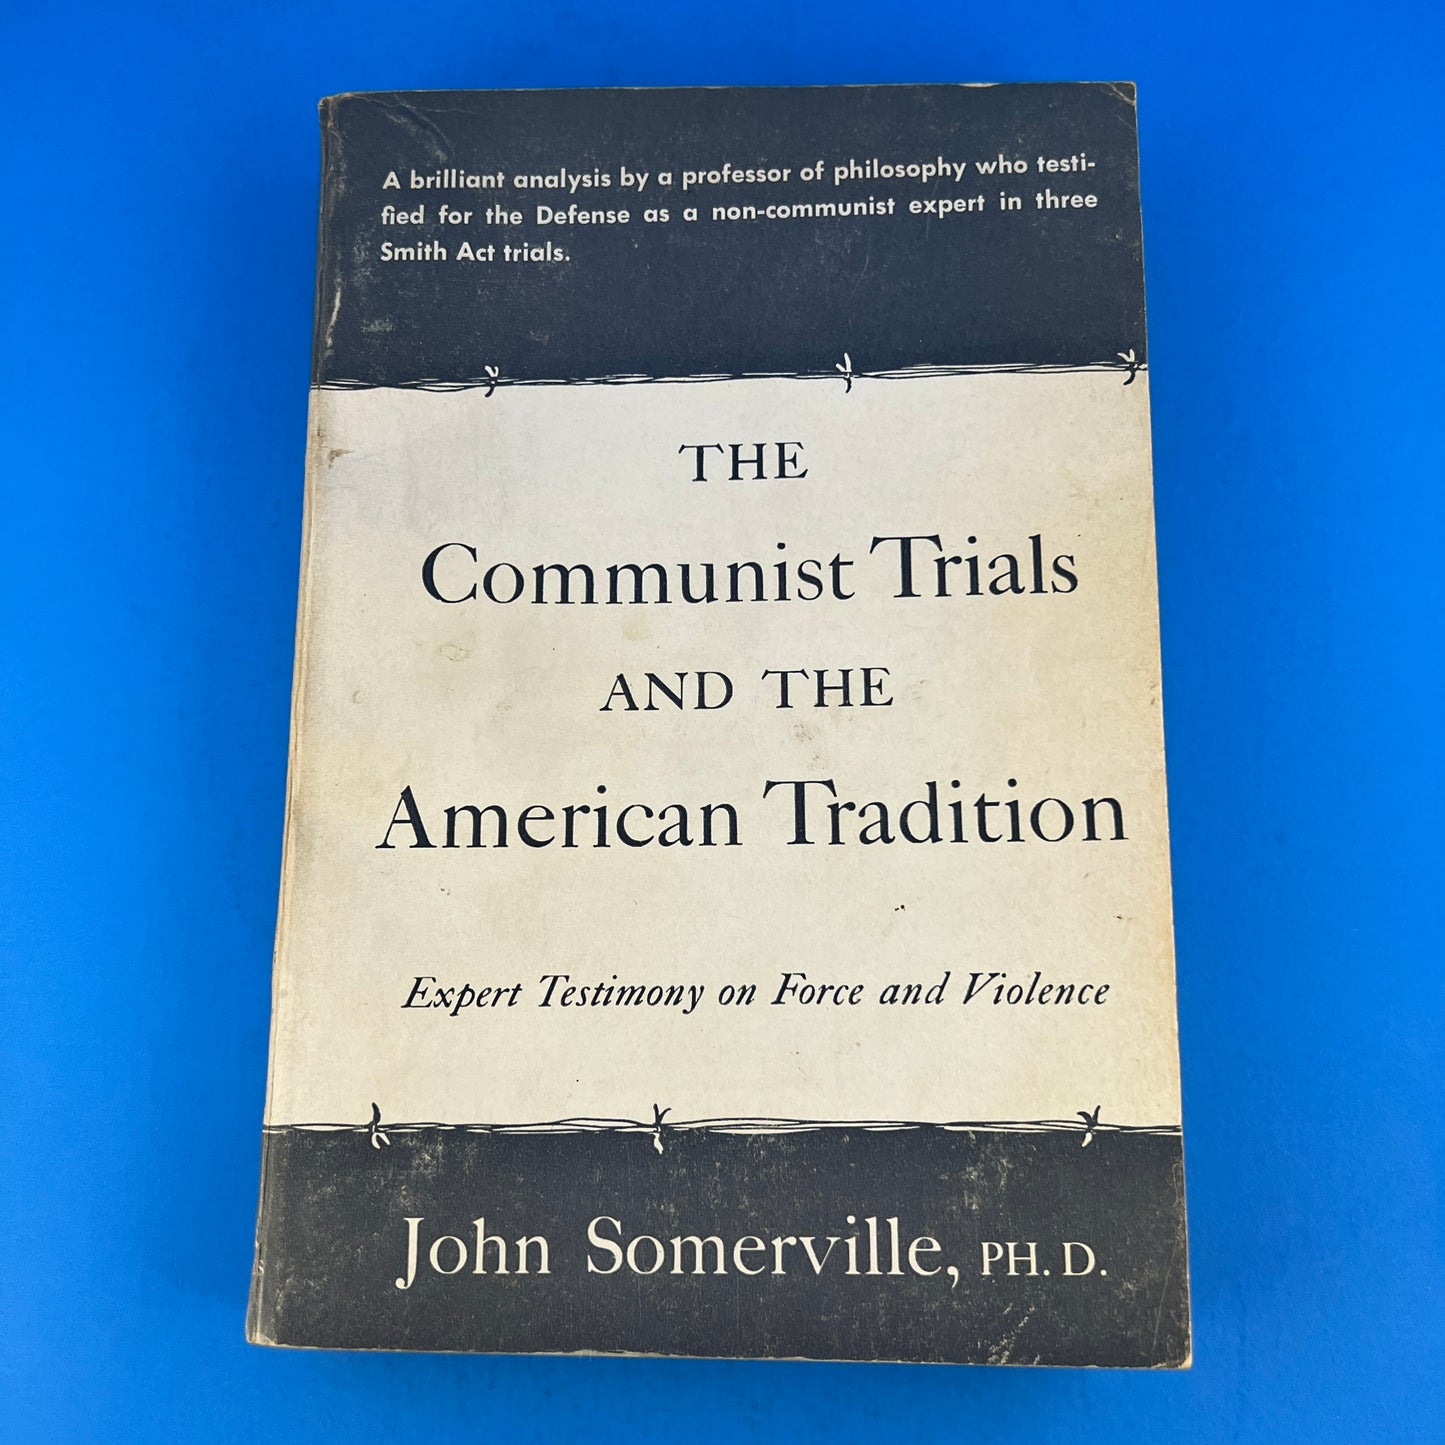 The Communist Trials and The American Tradition